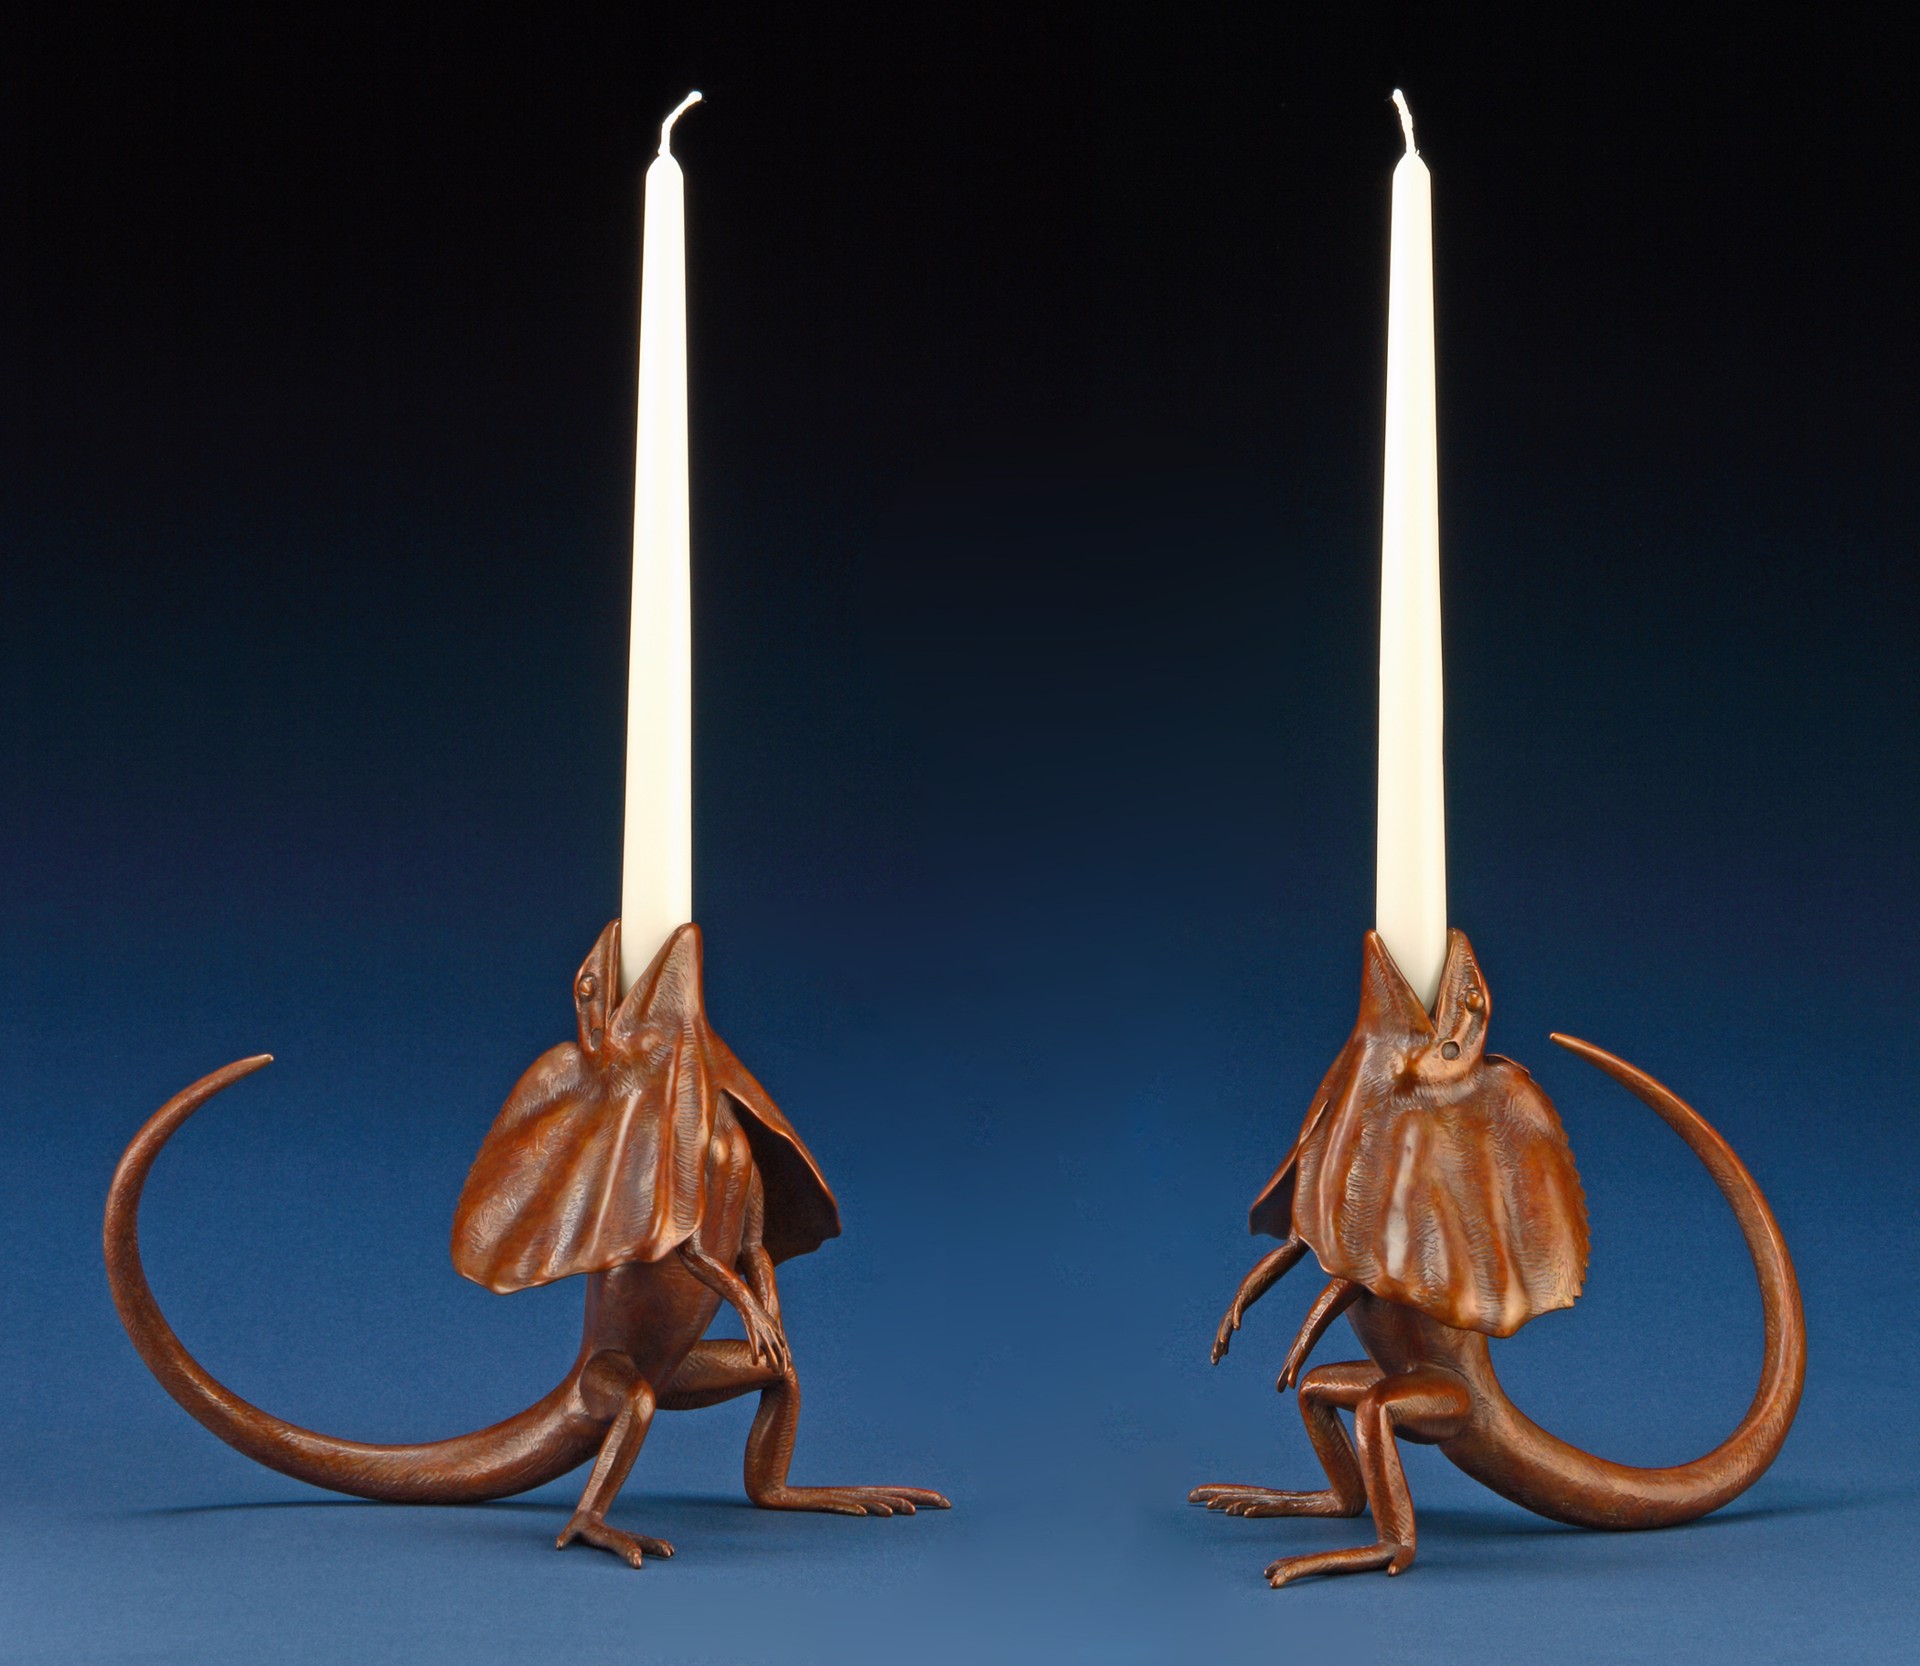 Frilled Lizard Candle Holders by Tony Hochstetler